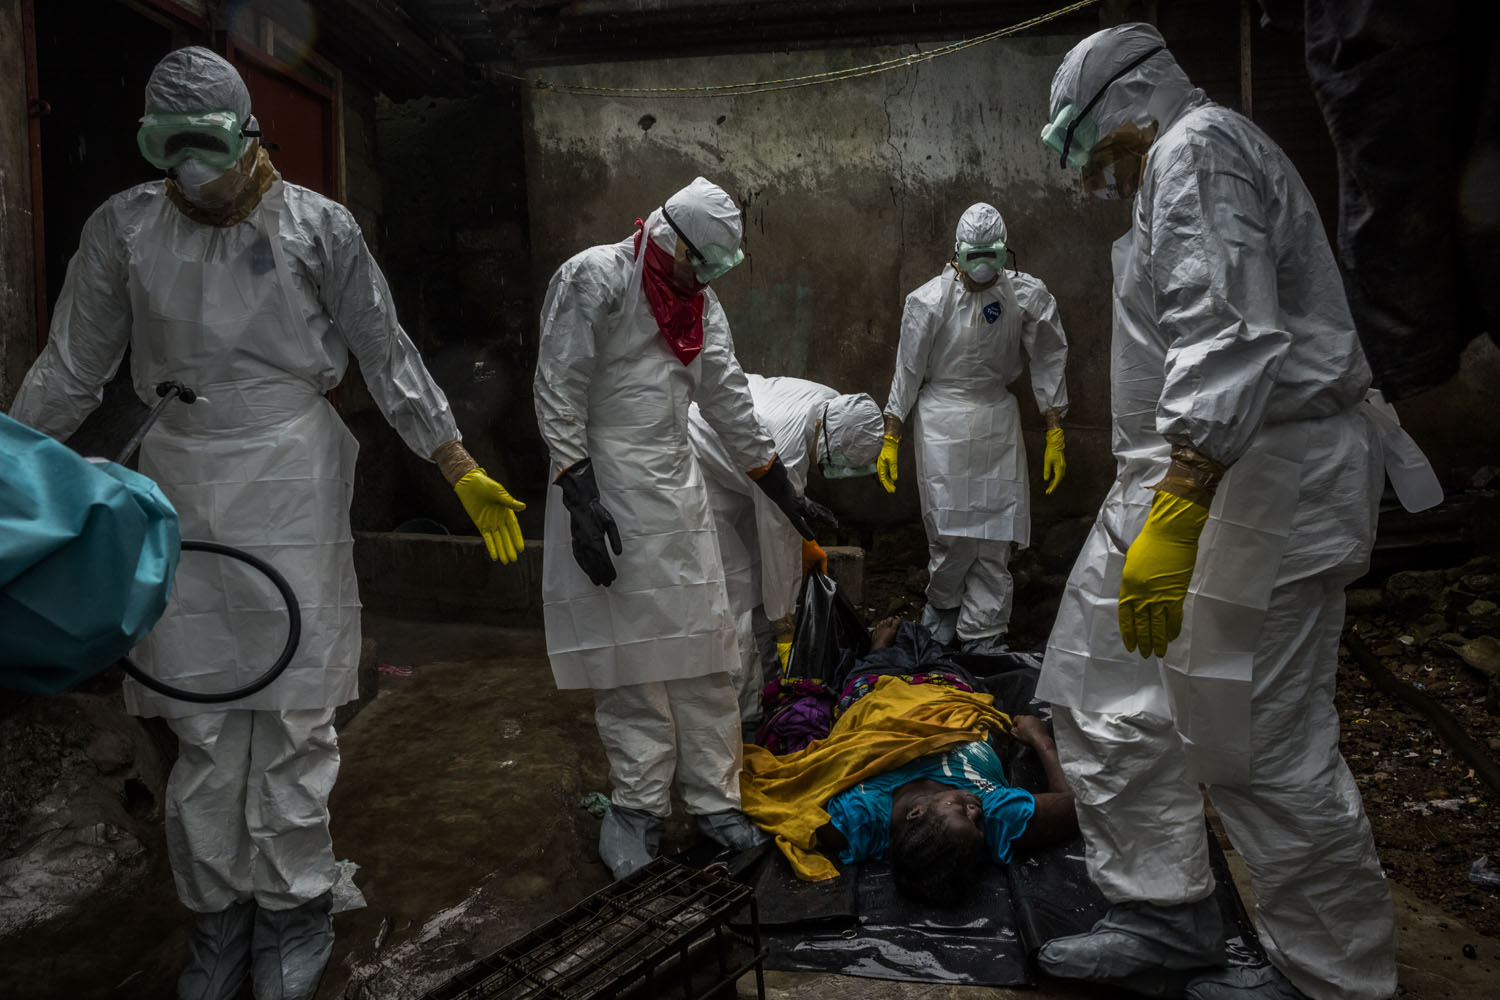 Members of a Liberian Red Cross burial team, under contract from the Liberian Ministry of Health, remove the body of a suspected Ebola victim Lorpu David, 30 on Sept. 18, 2014 in the Gurley street community in central Monrovia, Liberia.